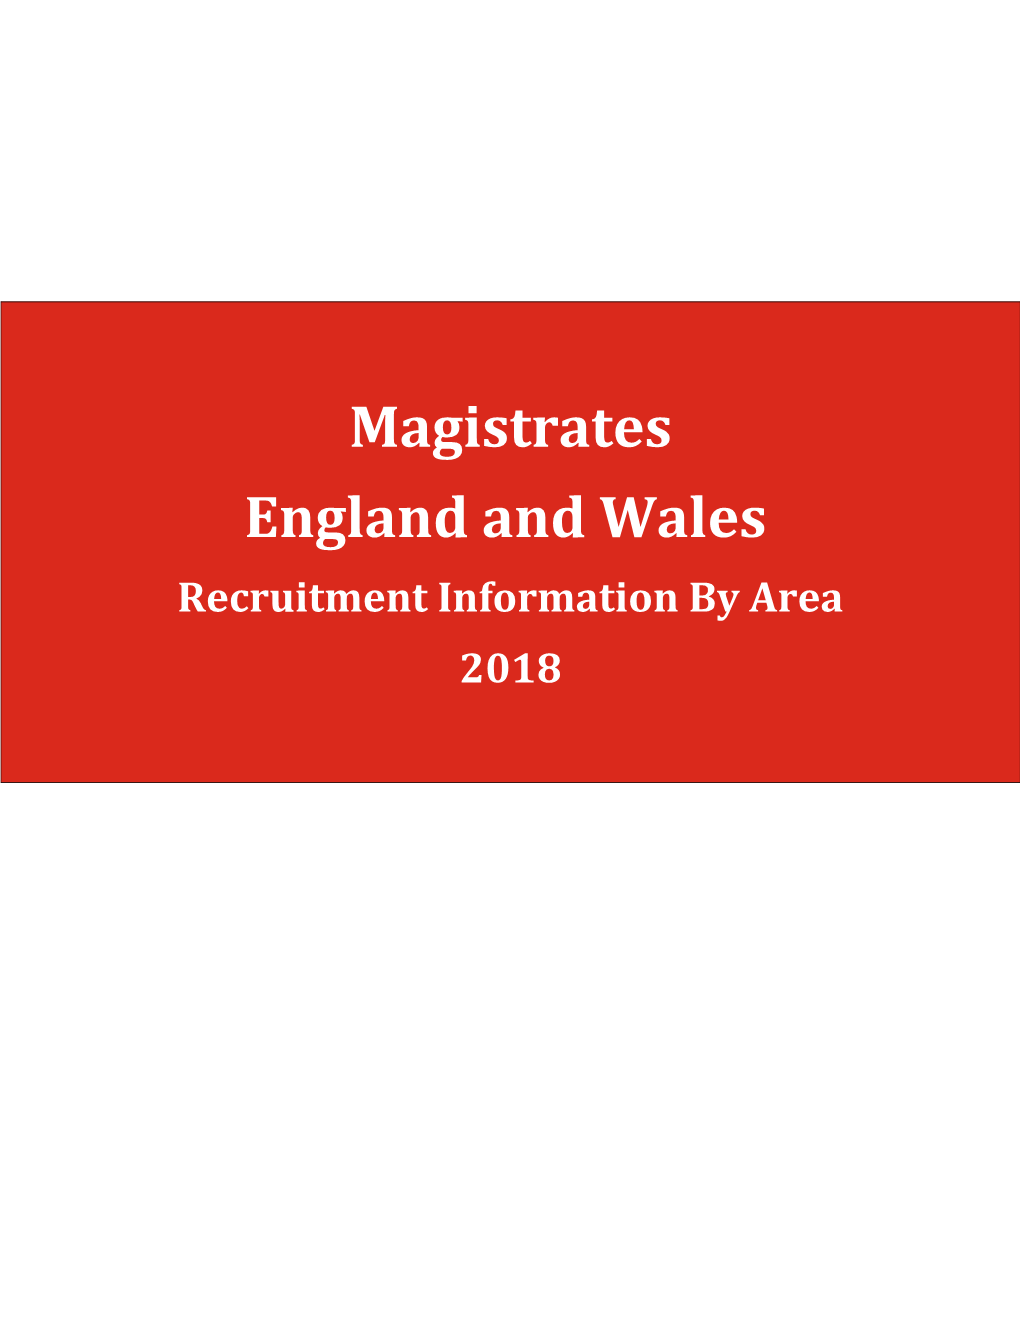 Magistrates' Advisory Committee: Recruitment Information